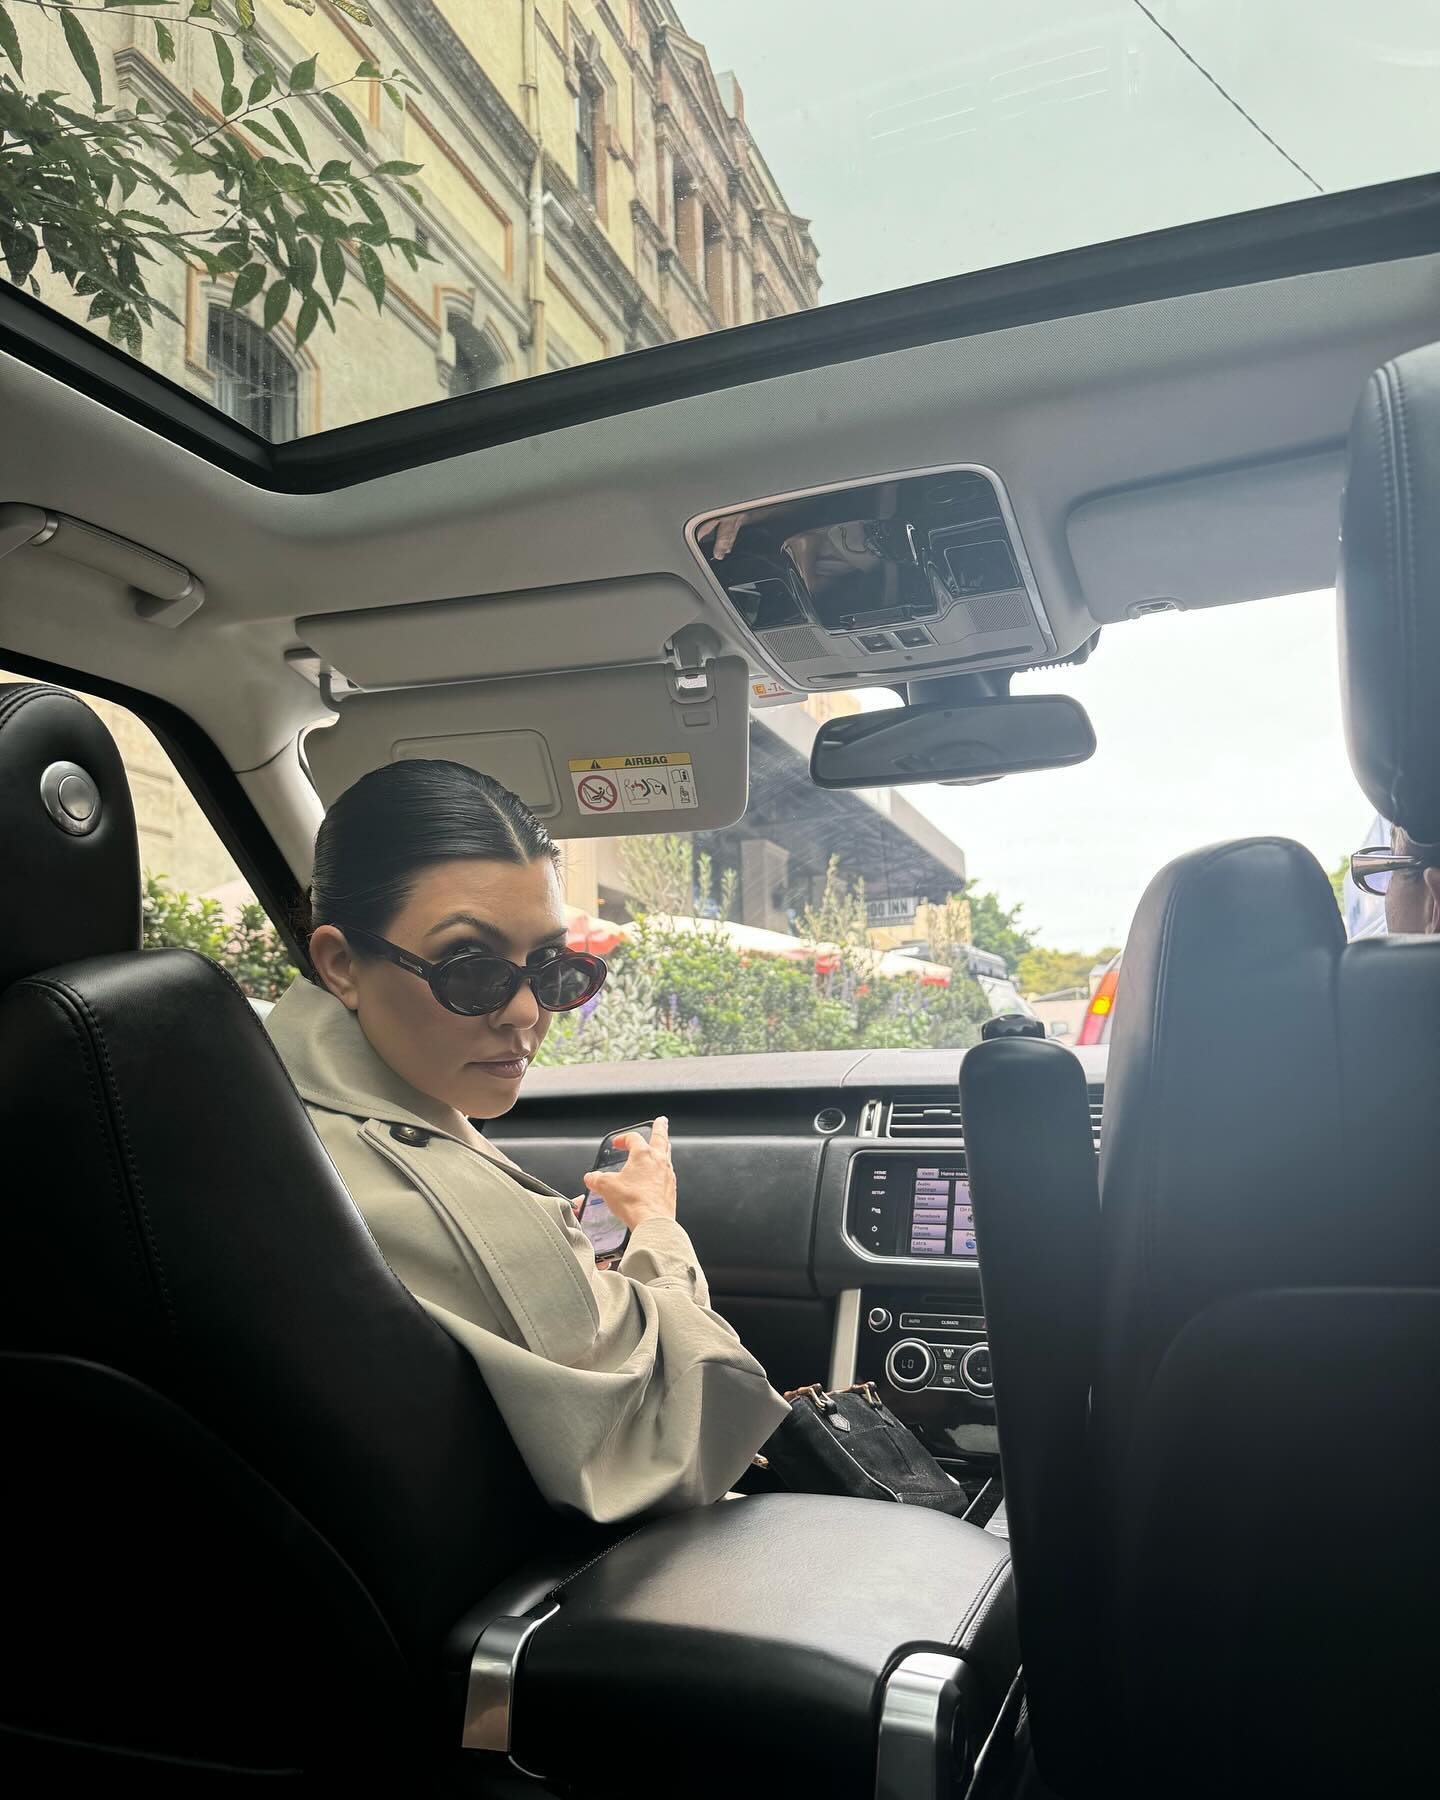 In 2022, Kourtney caught backlash for seemingly putting her kids in an unsafe situation during a car ride